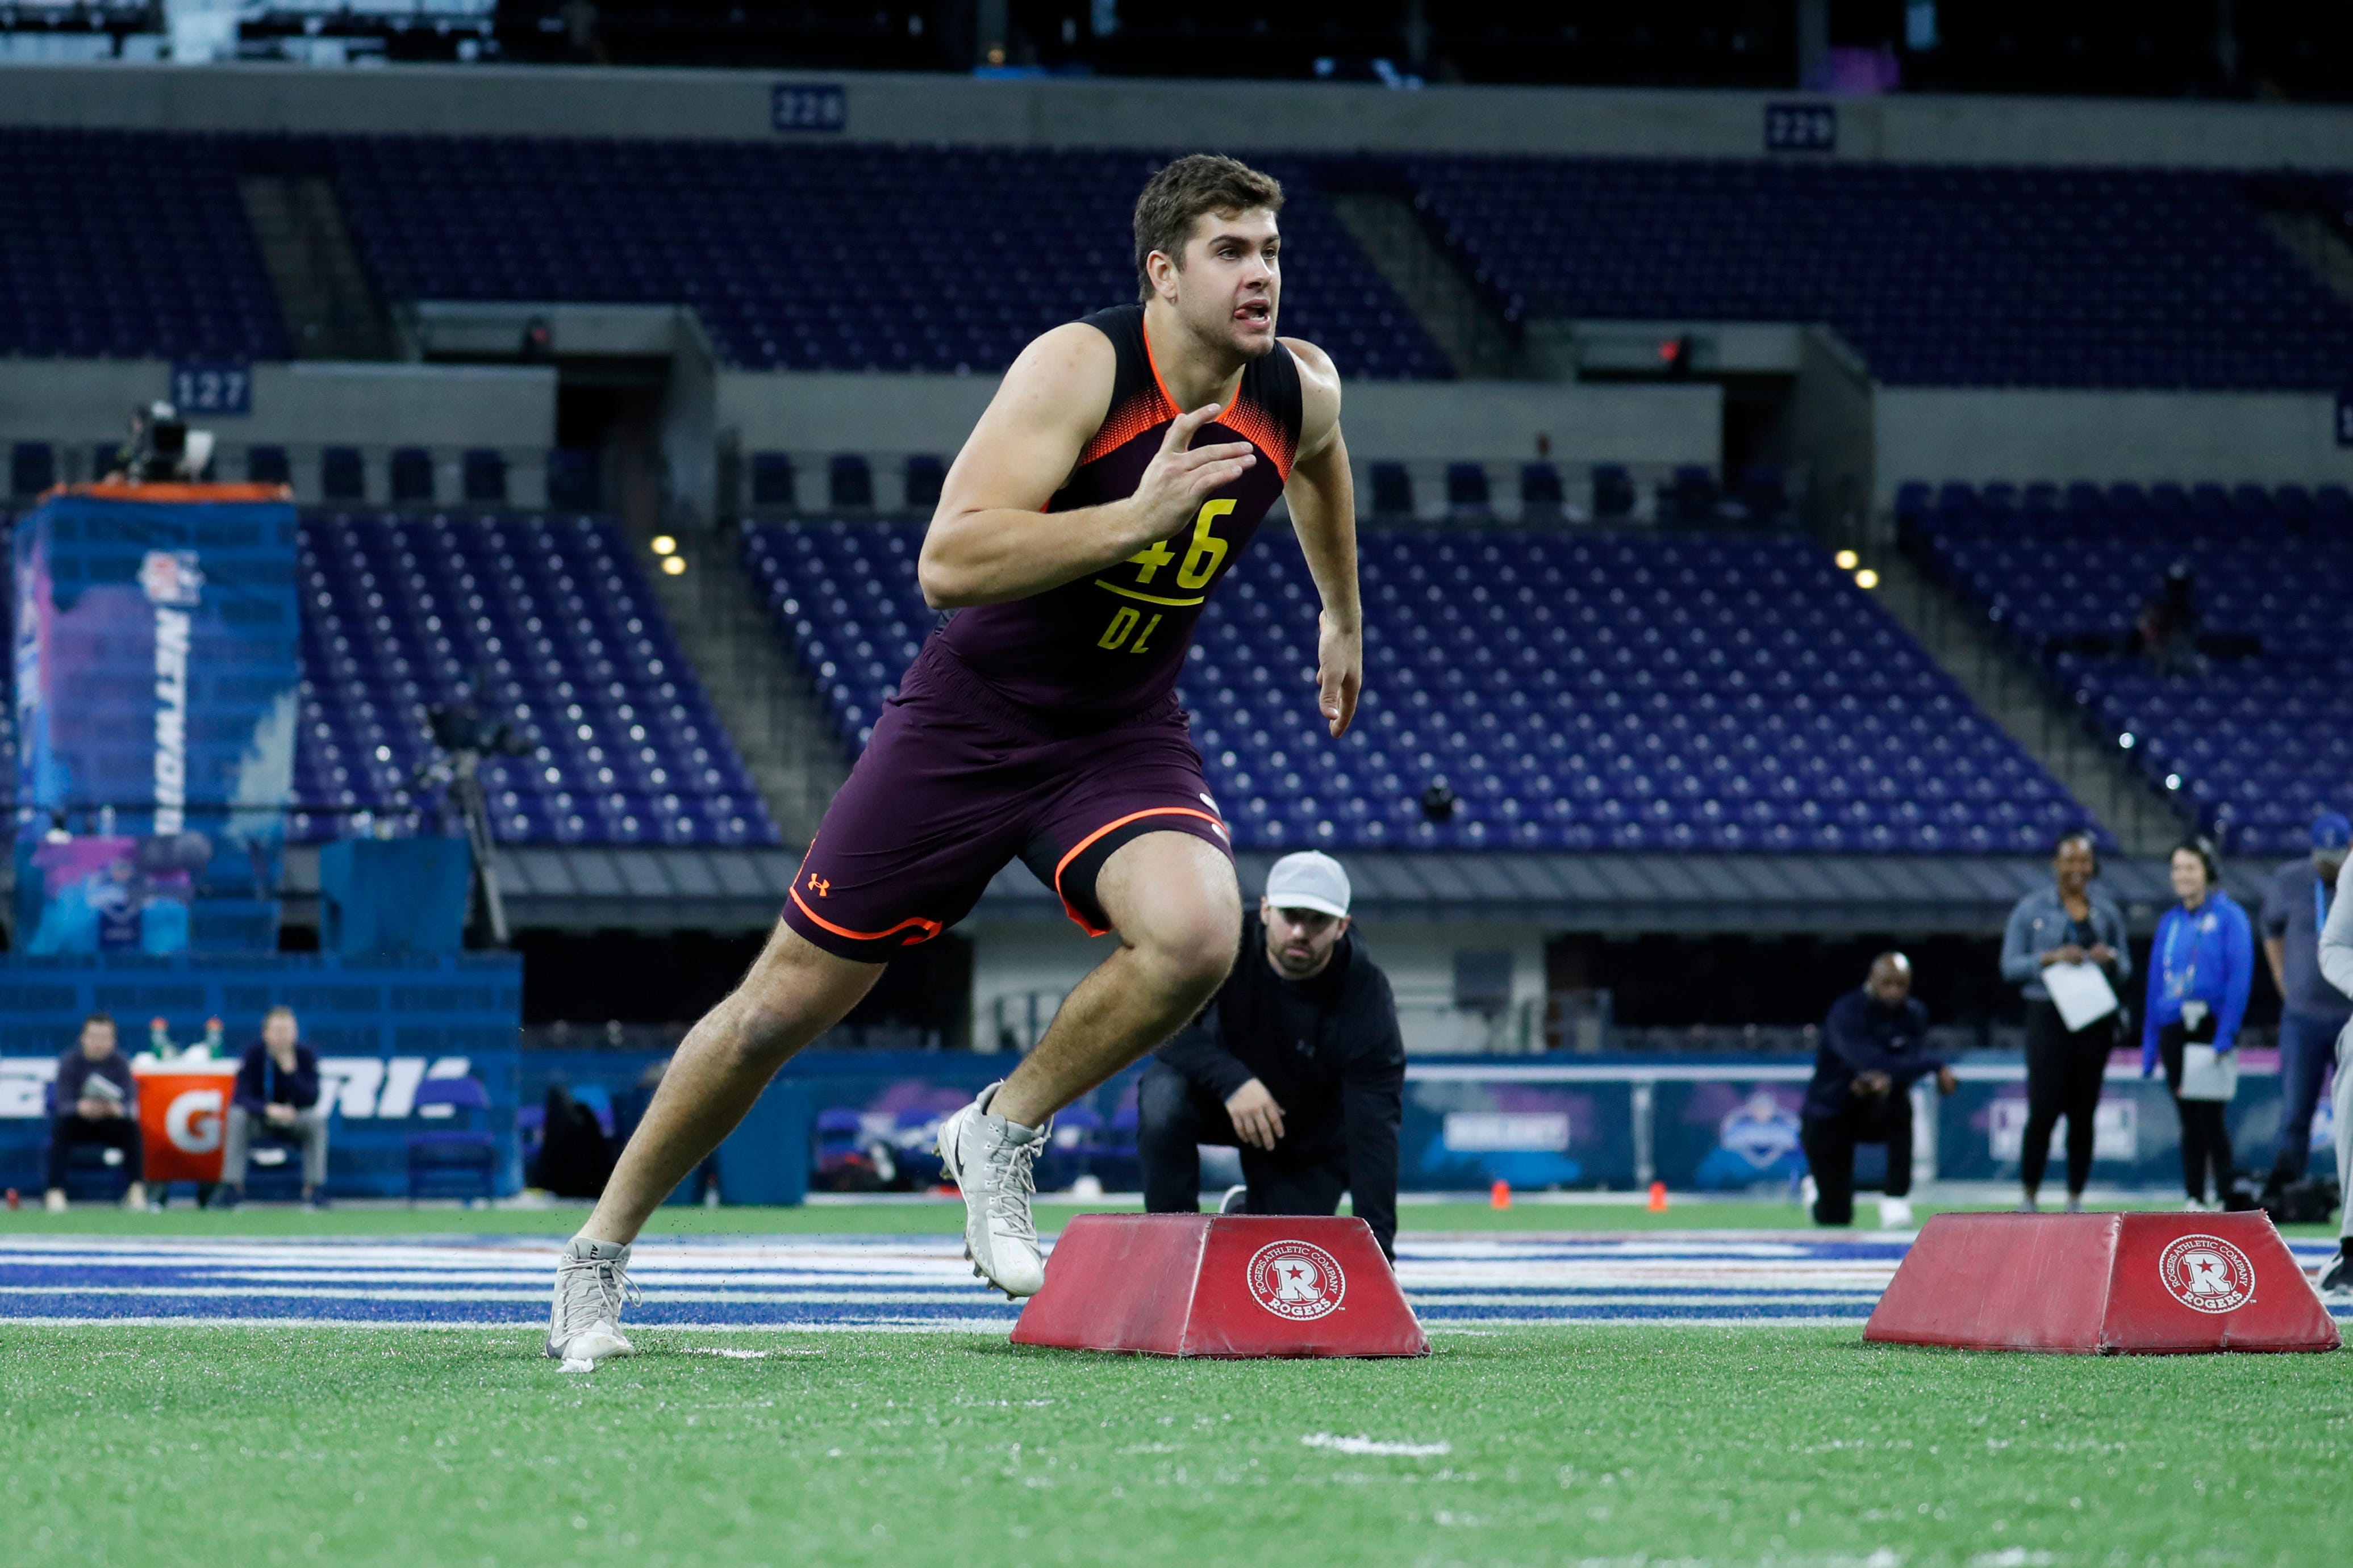 Iowa defensive lineman Anthony Nelson goes through workout drills during the 2019 NFL Combine at Lucas Oil Stadium.